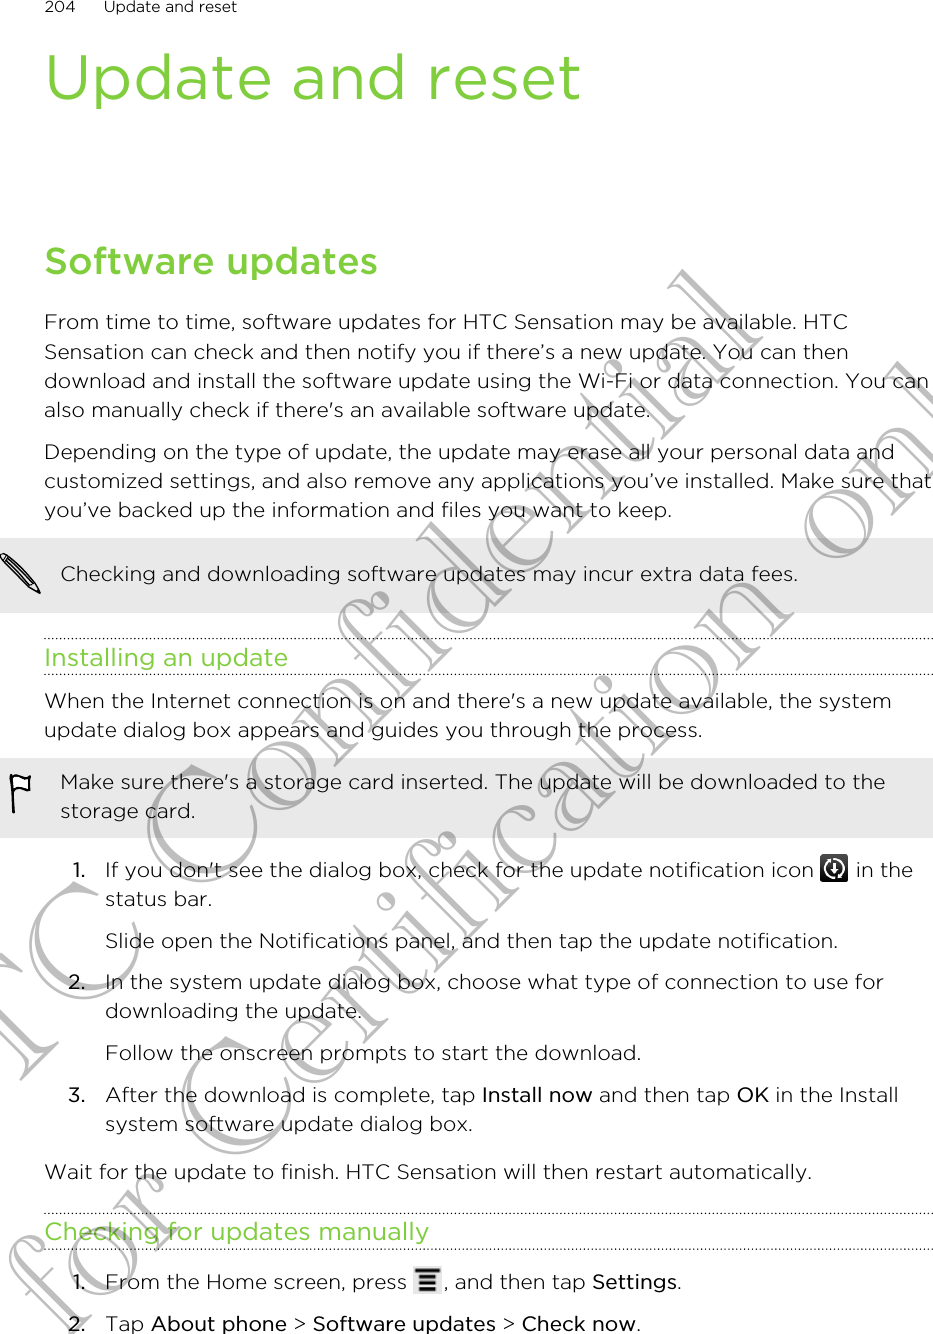 Update and resetSoftware updatesFrom time to time, software updates for HTC Sensation may be available. HTCSensation can check and then notify you if there’s a new update. You can thendownload and install the software update using the Wi-Fi or data connection. You canalso manually check if there&apos;s an available software update.Depending on the type of update, the update may erase all your personal data andcustomized settings, and also remove any applications you’ve installed. Make sure thatyou’ve backed up the information and files you want to keep.Checking and downloading software updates may incur extra data fees.Installing an updateWhen the Internet connection is on and there&apos;s a new update available, the systemupdate dialog box appears and guides you through the process.Make sure there&apos;s a storage card inserted. The update will be downloaded to thestorage card.1. If you don&apos;t see the dialog box, check for the update notification icon   in thestatus bar. Slide open the Notifications panel, and then tap the update notification.2. In the system update dialog box, choose what type of connection to use fordownloading the update. Follow the onscreen prompts to start the download.3. After the download is complete, tap Install now and then tap OK in the Installsystem software update dialog box.Wait for the update to finish. HTC Sensation will then restart automatically.Checking for updates manually1. From the Home screen, press  , and then tap Settings.2. Tap About phone &gt; Software updates &gt; Check now.204 Update and resetHTC Confidential for Certification only